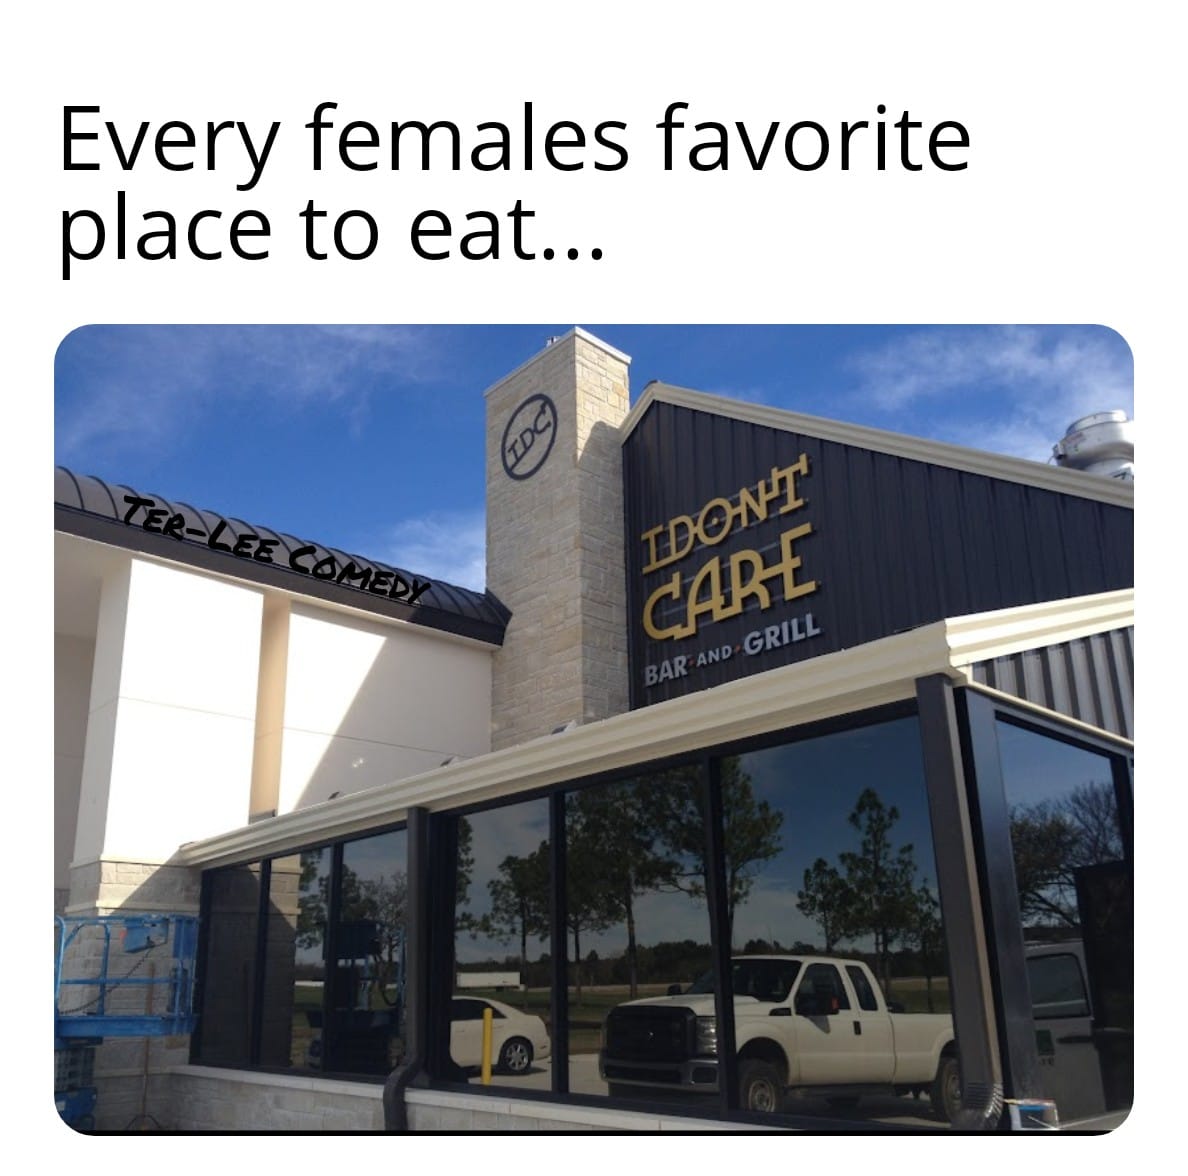 savage memes - i don't care bar and grill - Every females favorite place to eat... TerLee Comedy Idon'T Tdc Care Bar And Grill